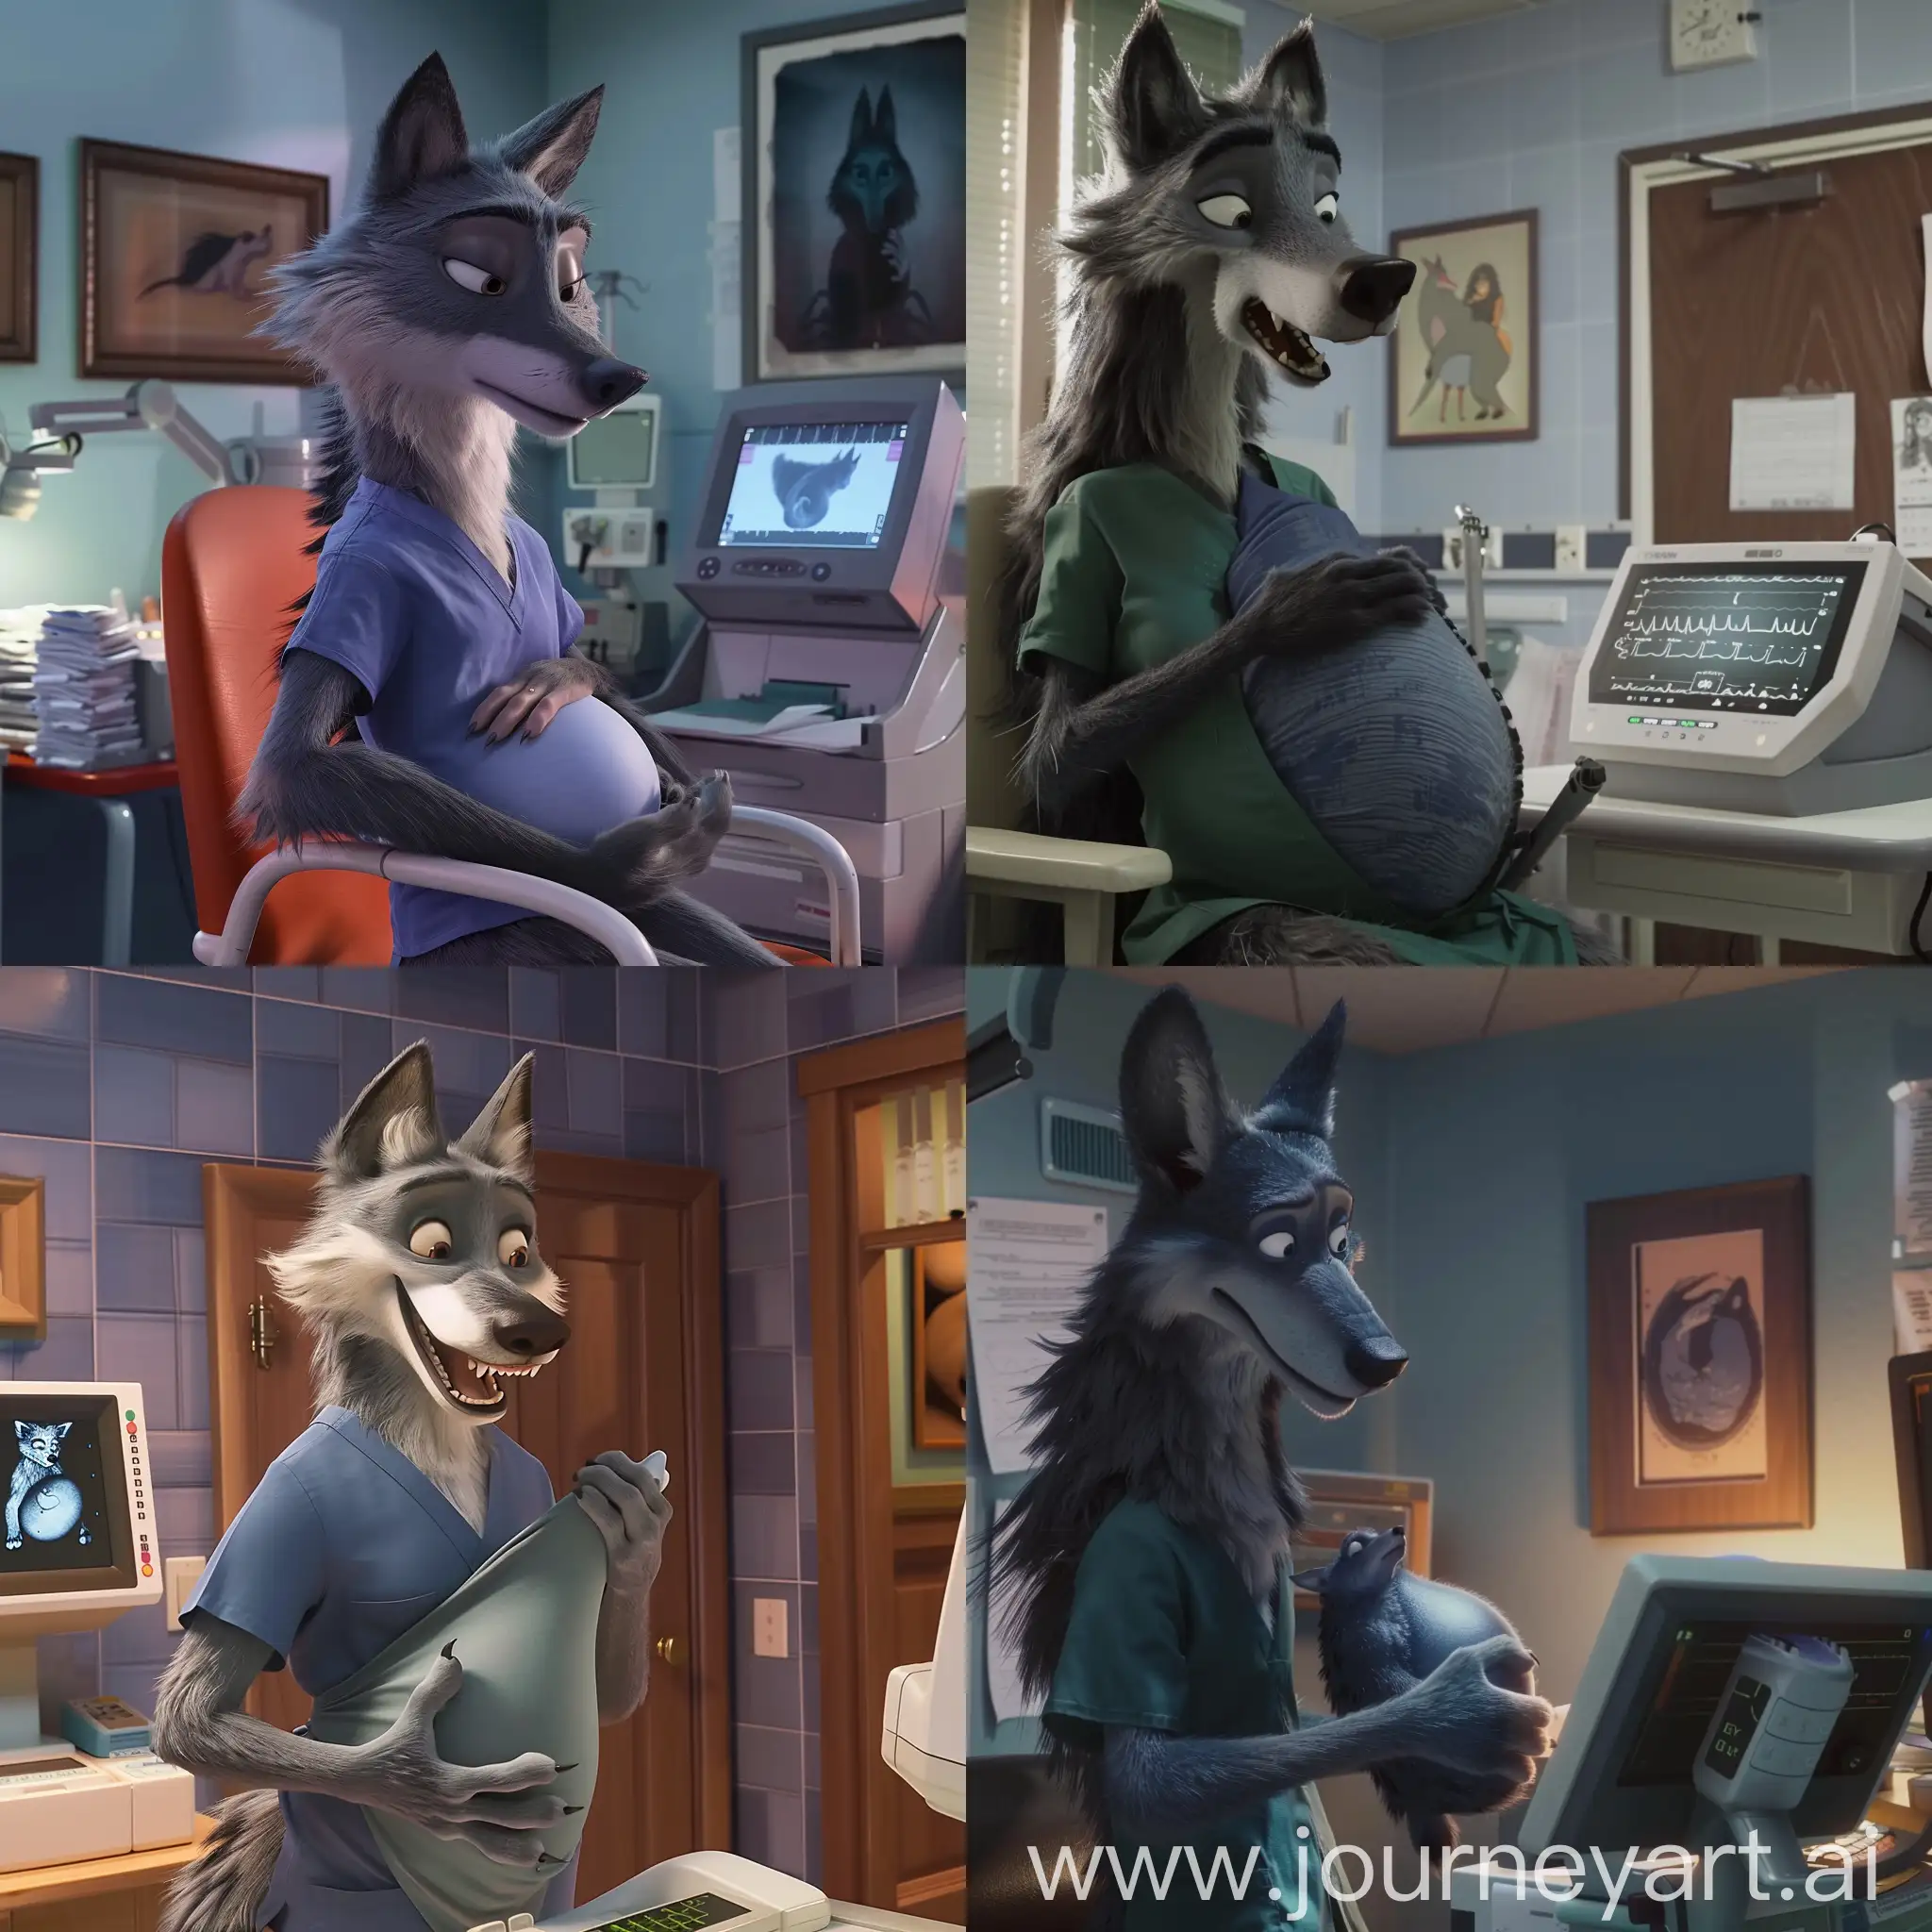 scene from a pixar film featuring a pregnant wolf woman in a doctor's office having an ultrasound